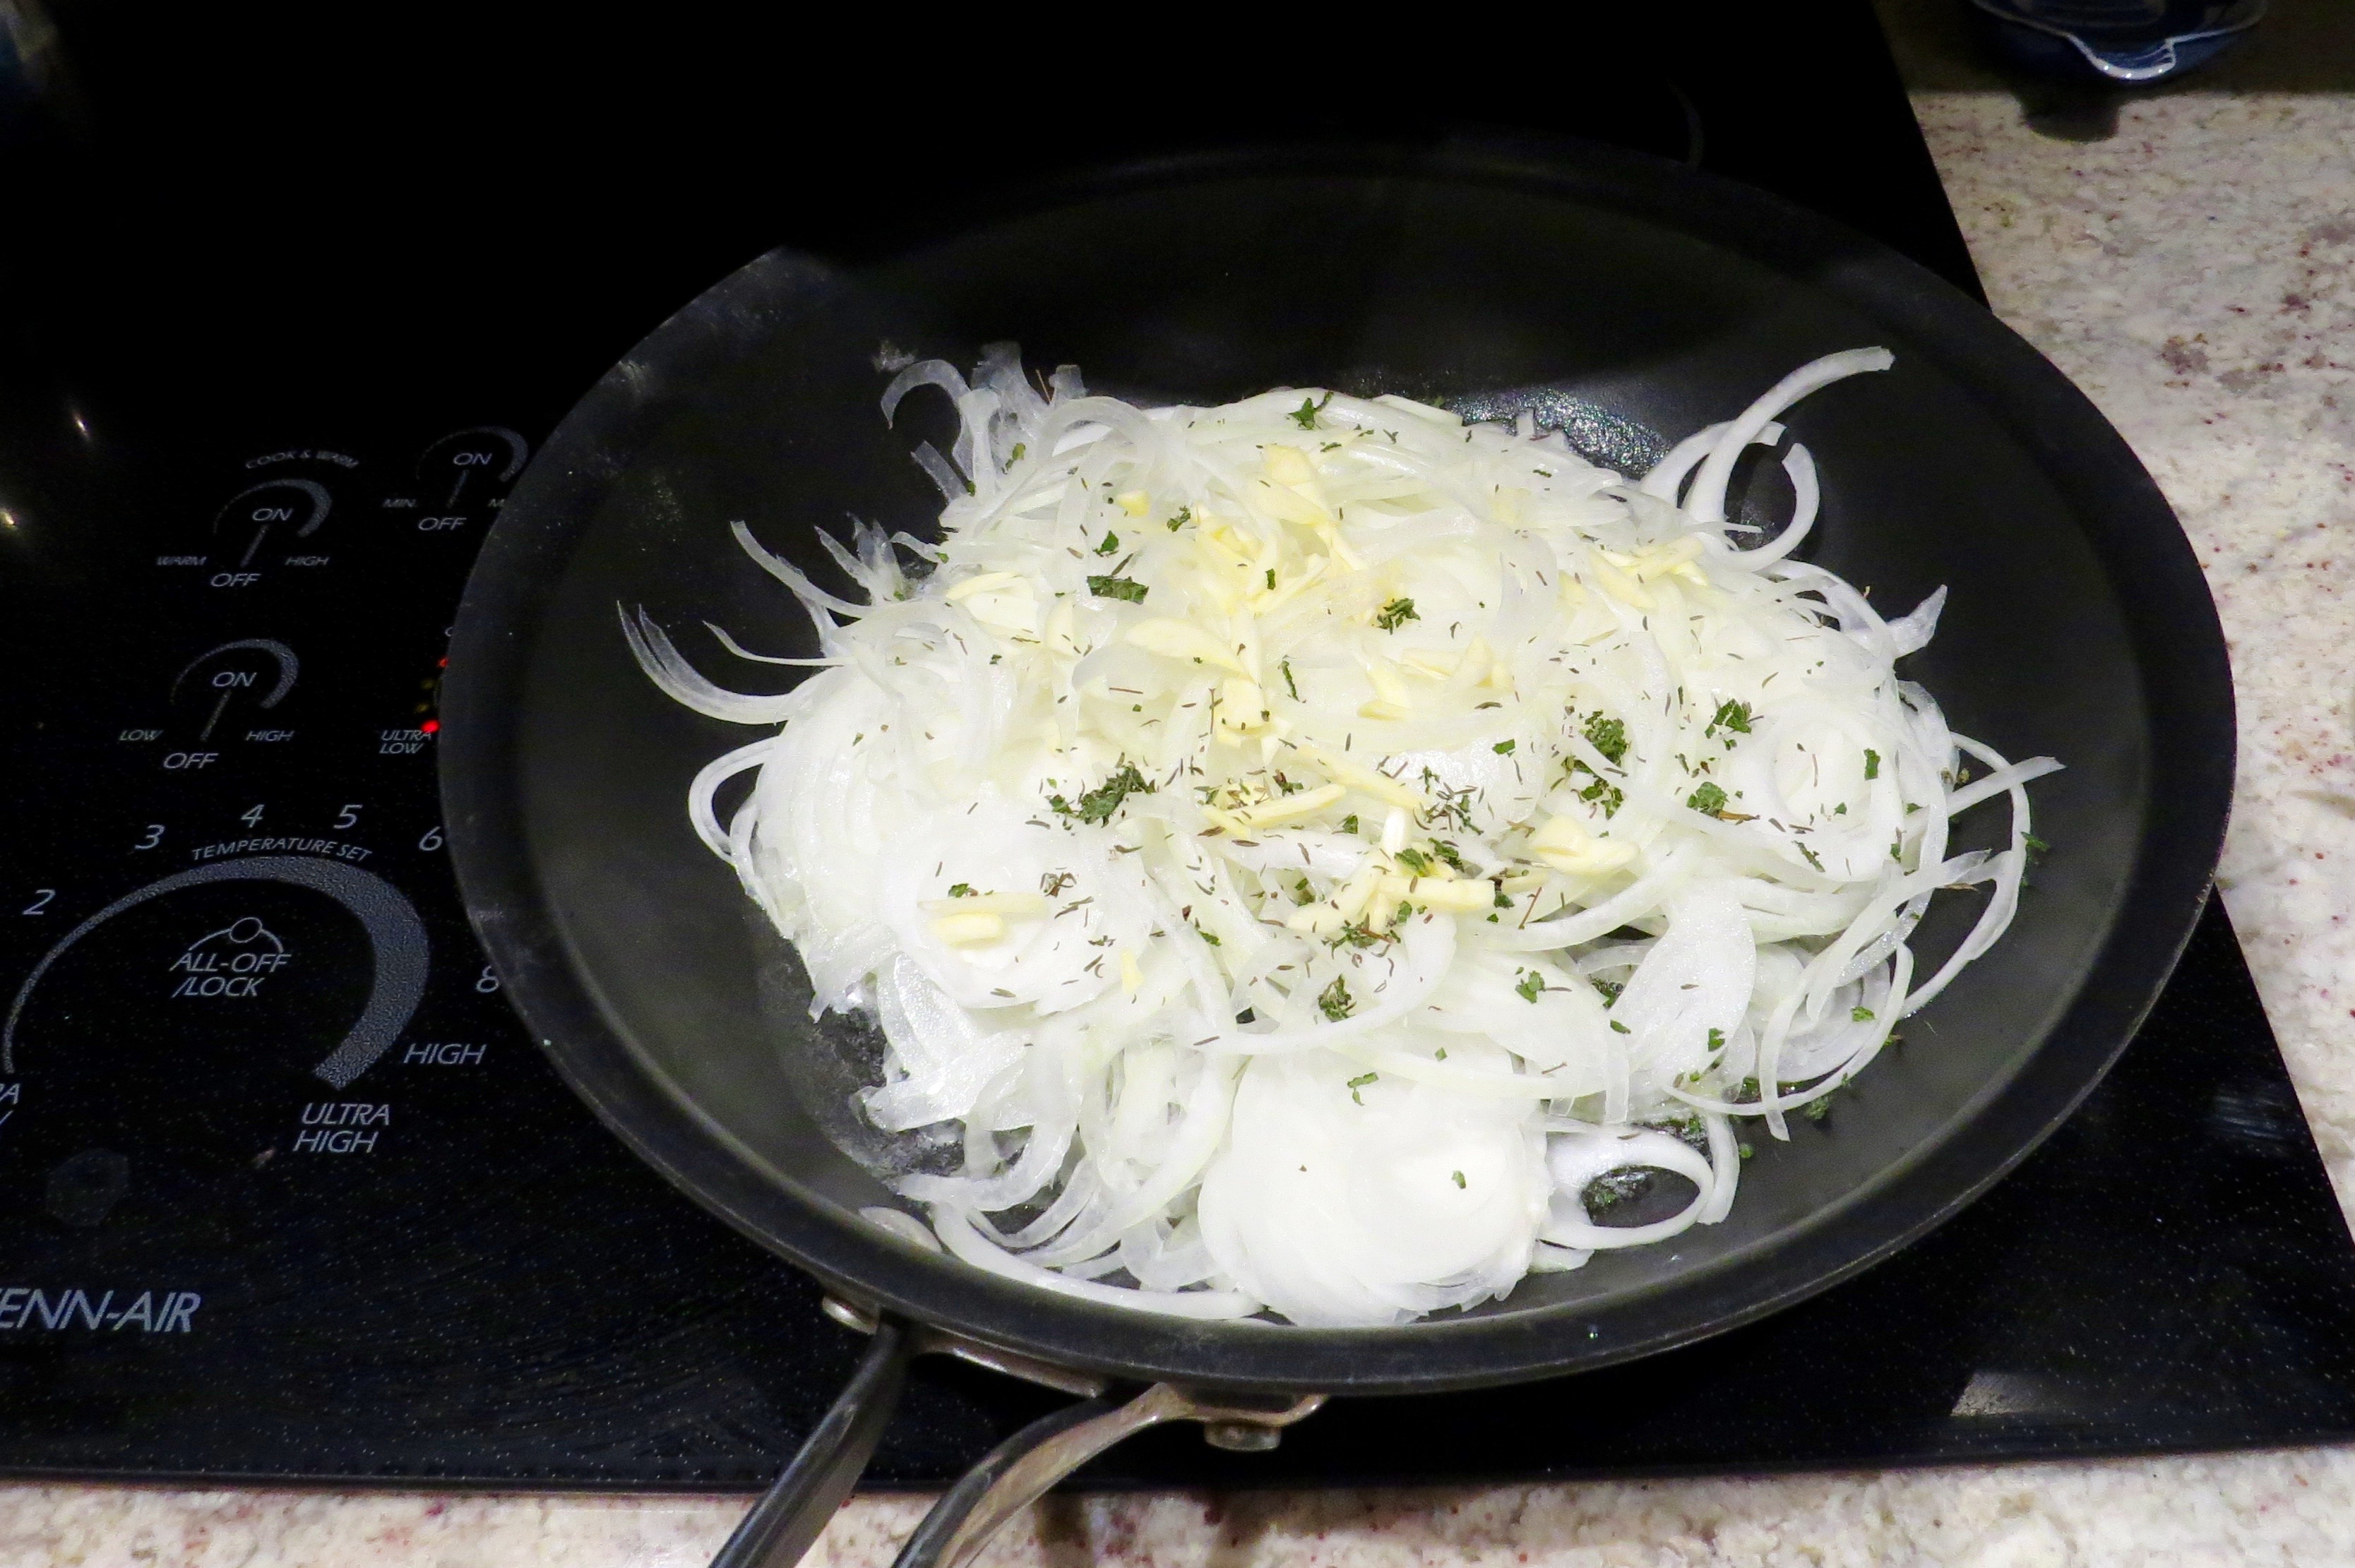 AFTER MELTING BUTTER WITH OLIVE OIL IN THIS PAN, I ADDED ONIONS, GARLIC AND HERBS TO COOK FOR 25-35 MINUTES. 